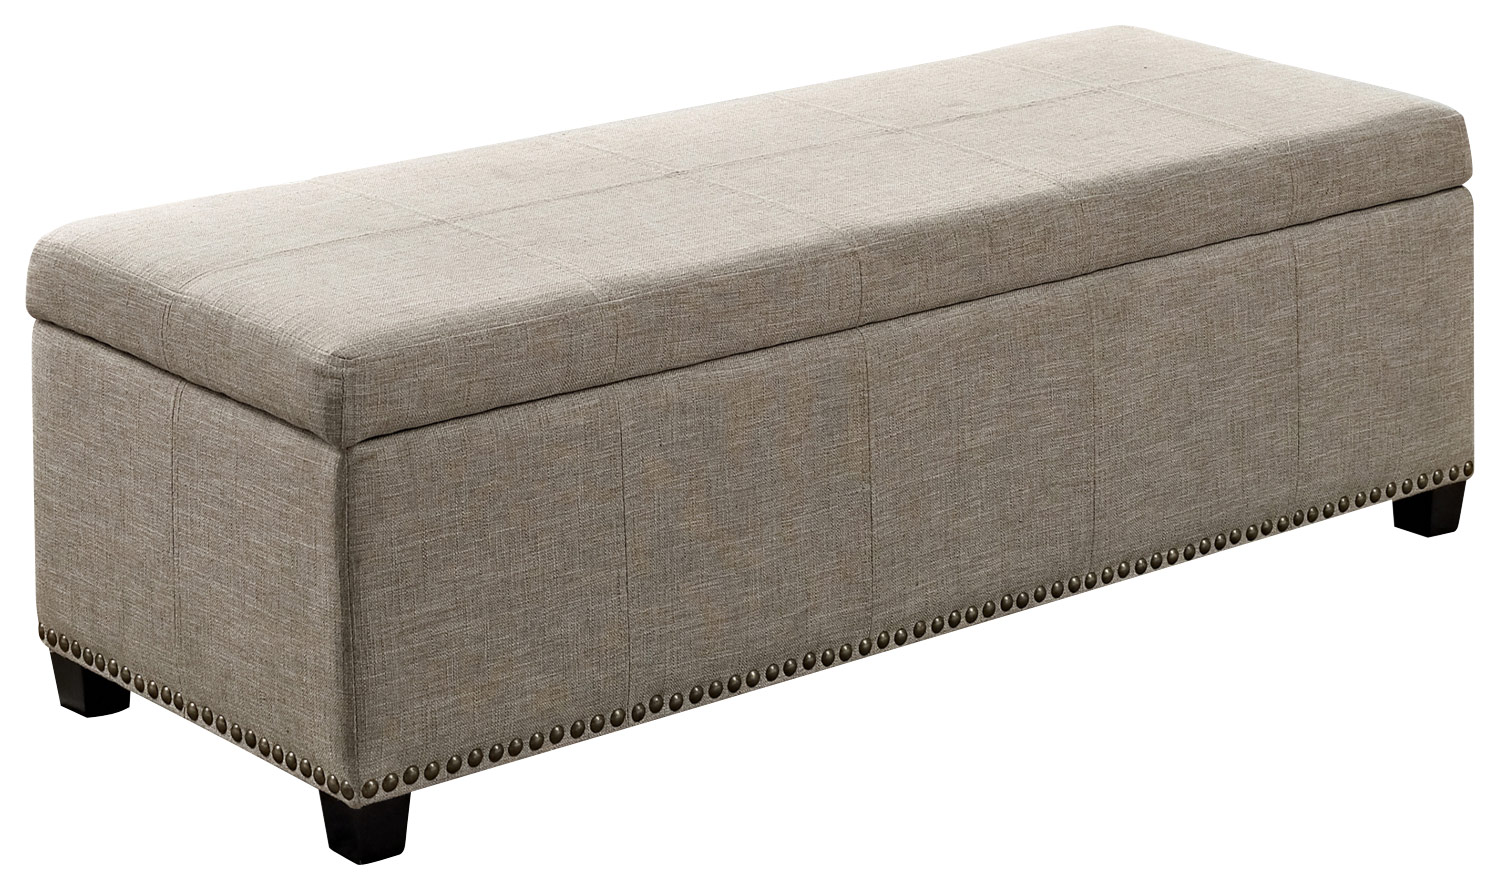 Simpli Home - Kingsley Rectangular Polyester Bench Ottoman With Inner Storage - Natural was $251.99 now $199.99 (21.0% off)